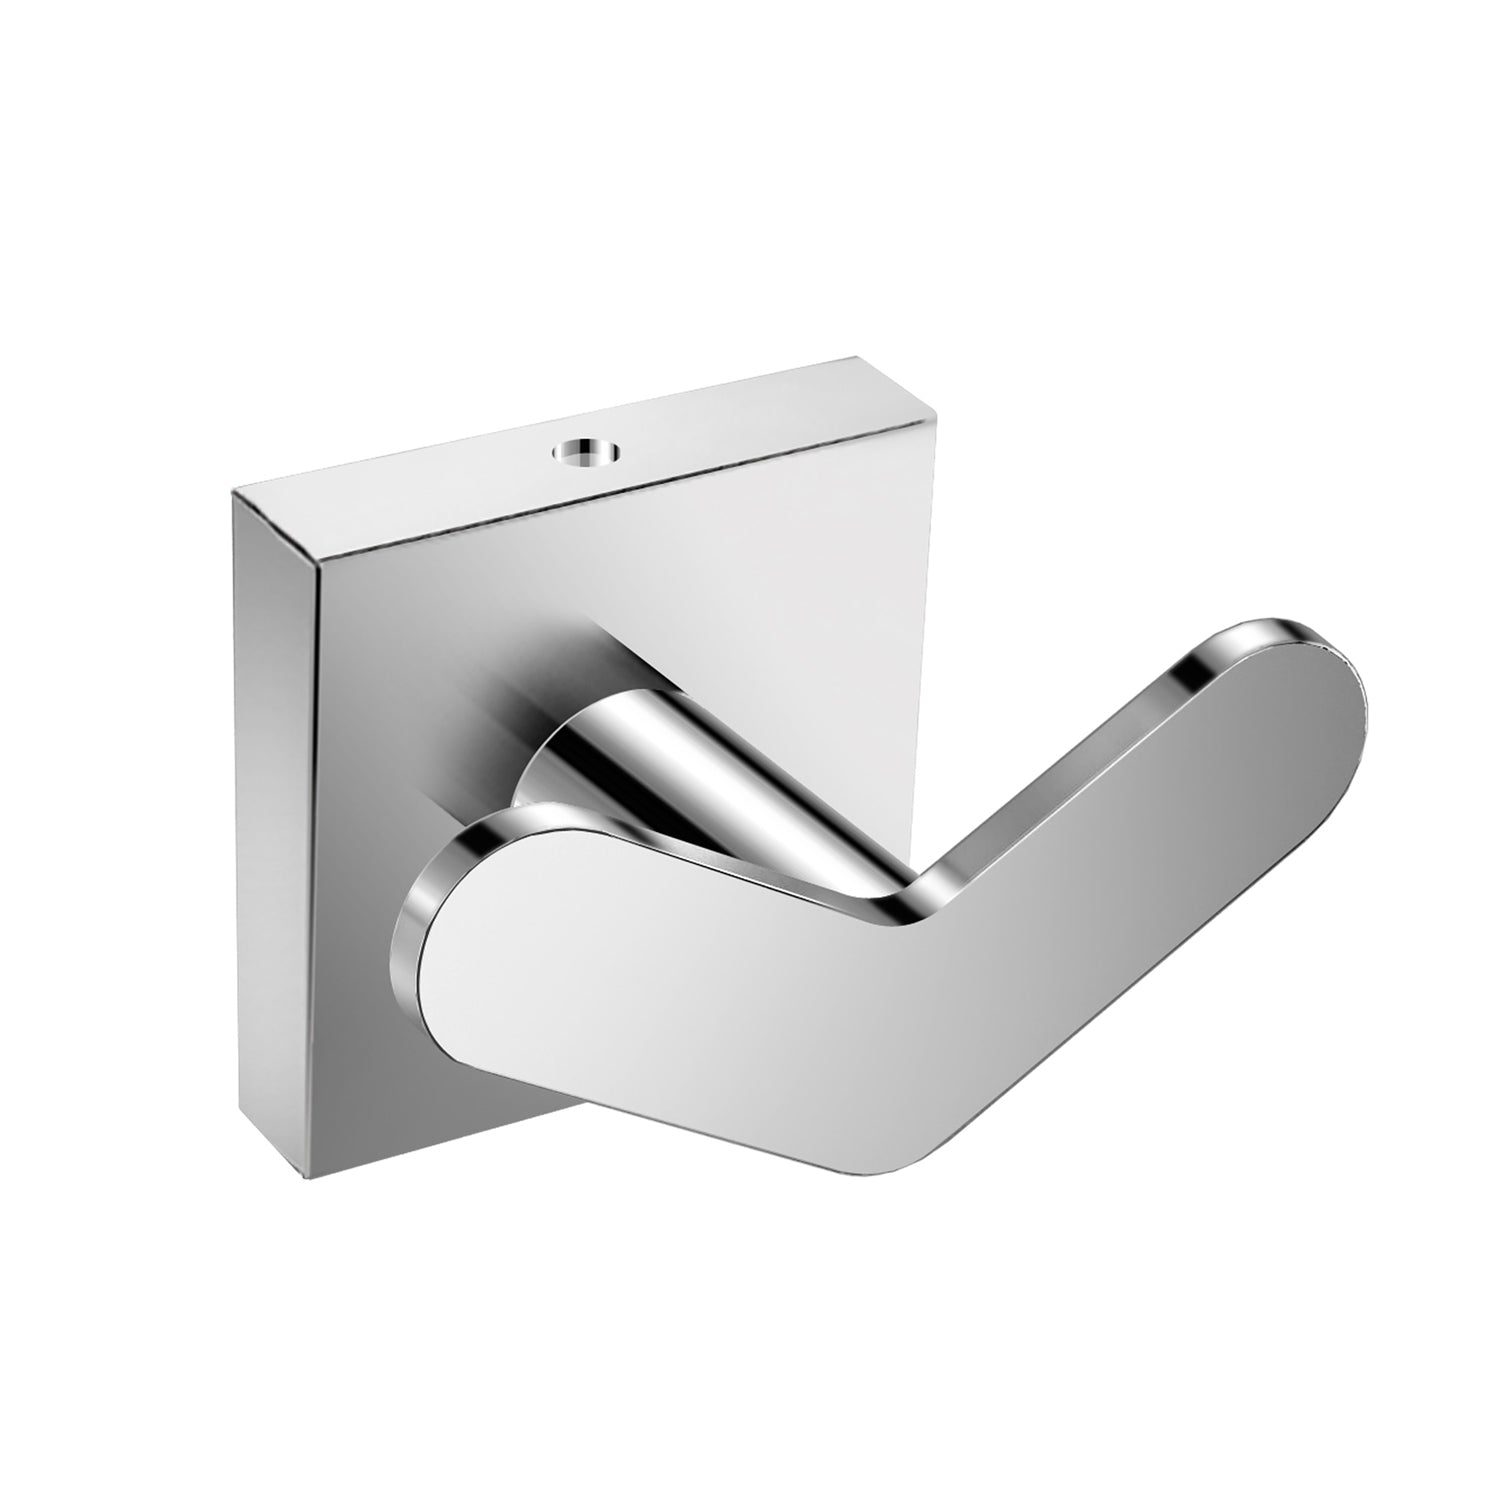 DAX Milano Towel Hook, Wall Mount Stainless Steel, 2-9/16 x 1-3/4 x 1-9/16 Inches (DAX-GDC160122)